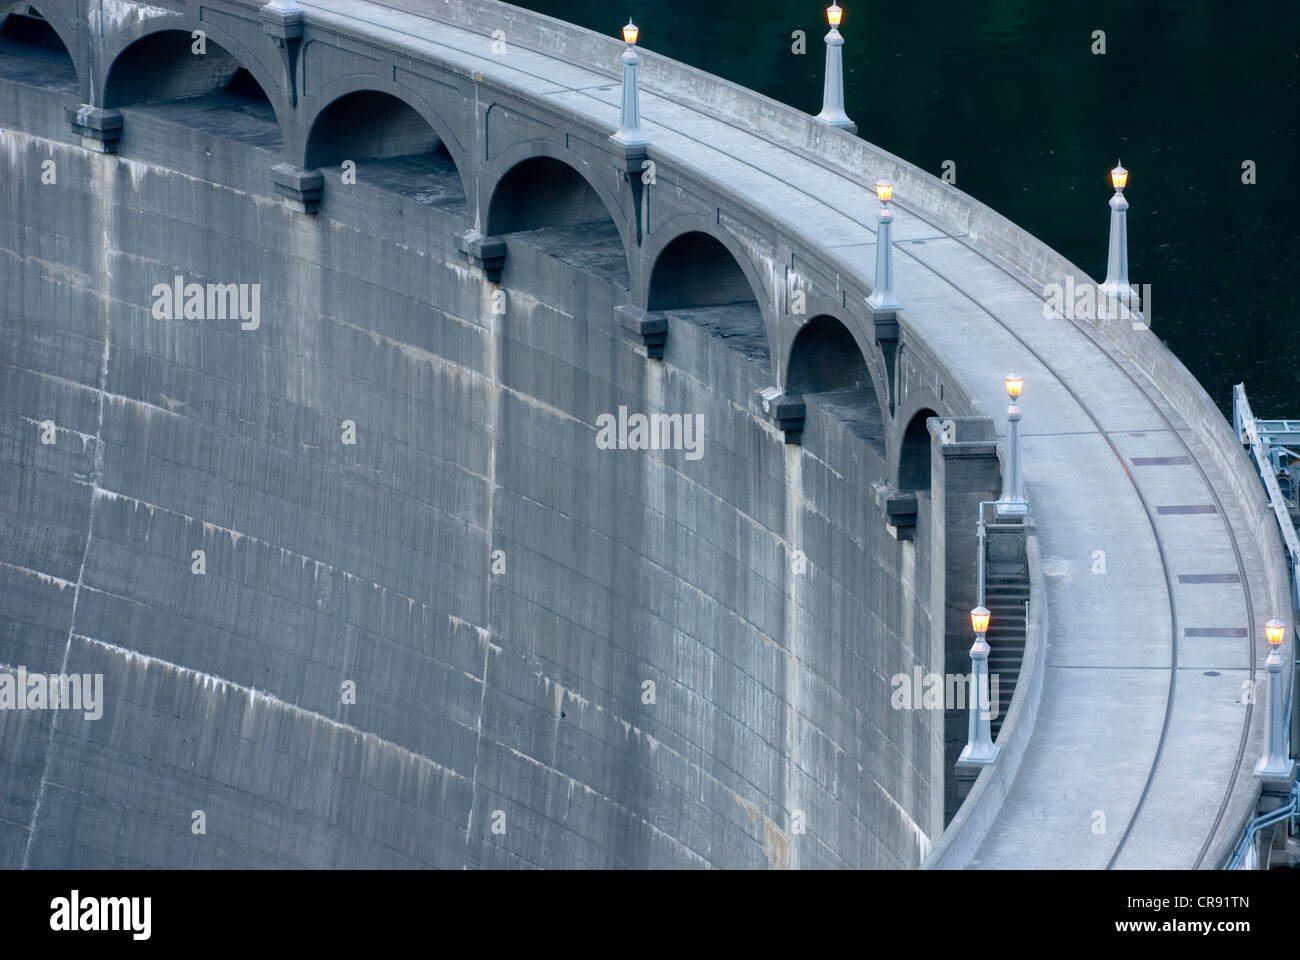 Diablo Dam, second of the three dams on the Upper Skagit River Gorge which provides power for the city of Seattle, Washington. Stock Photo